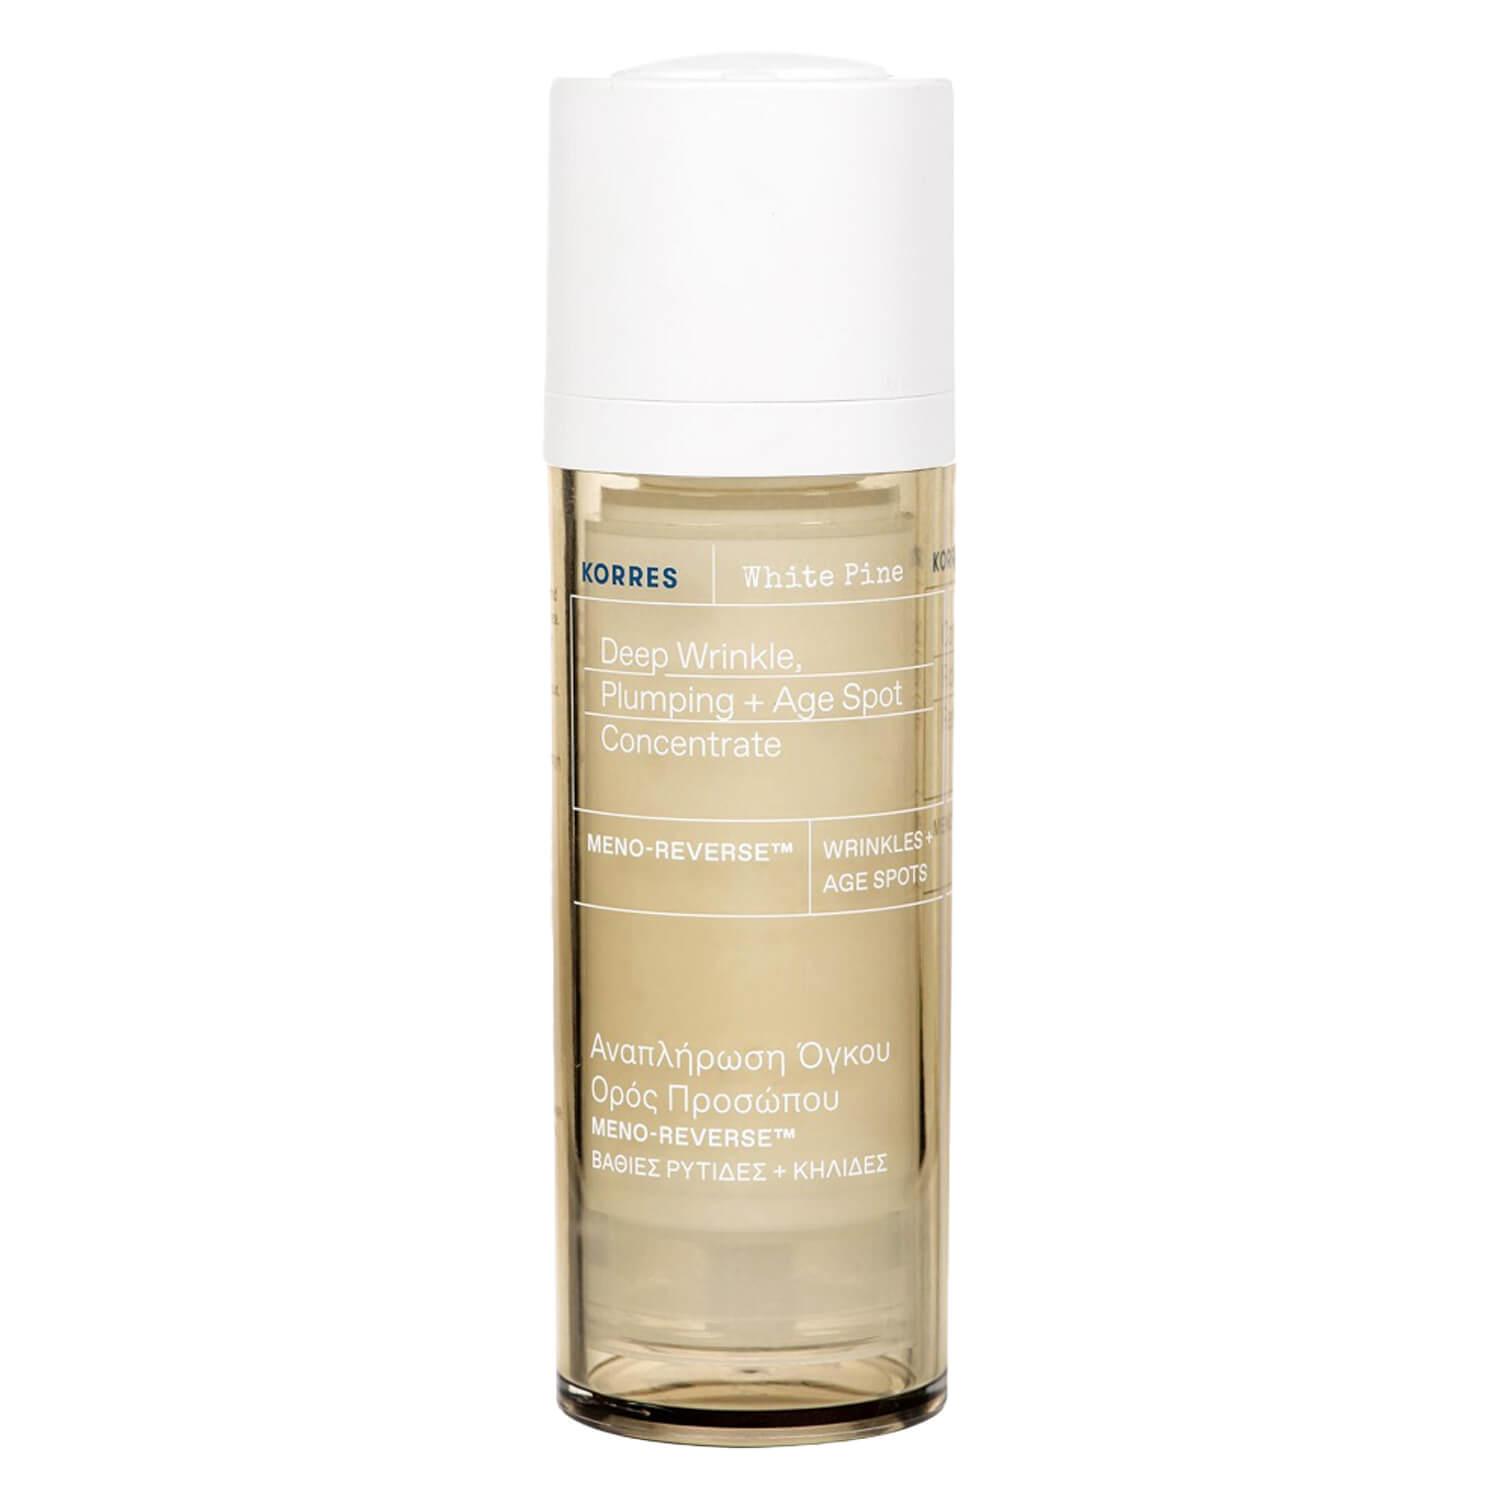 Korres Care - White Pine Meno Reverse Deep Wrinkle, Plumping + Age Spot Concentrate